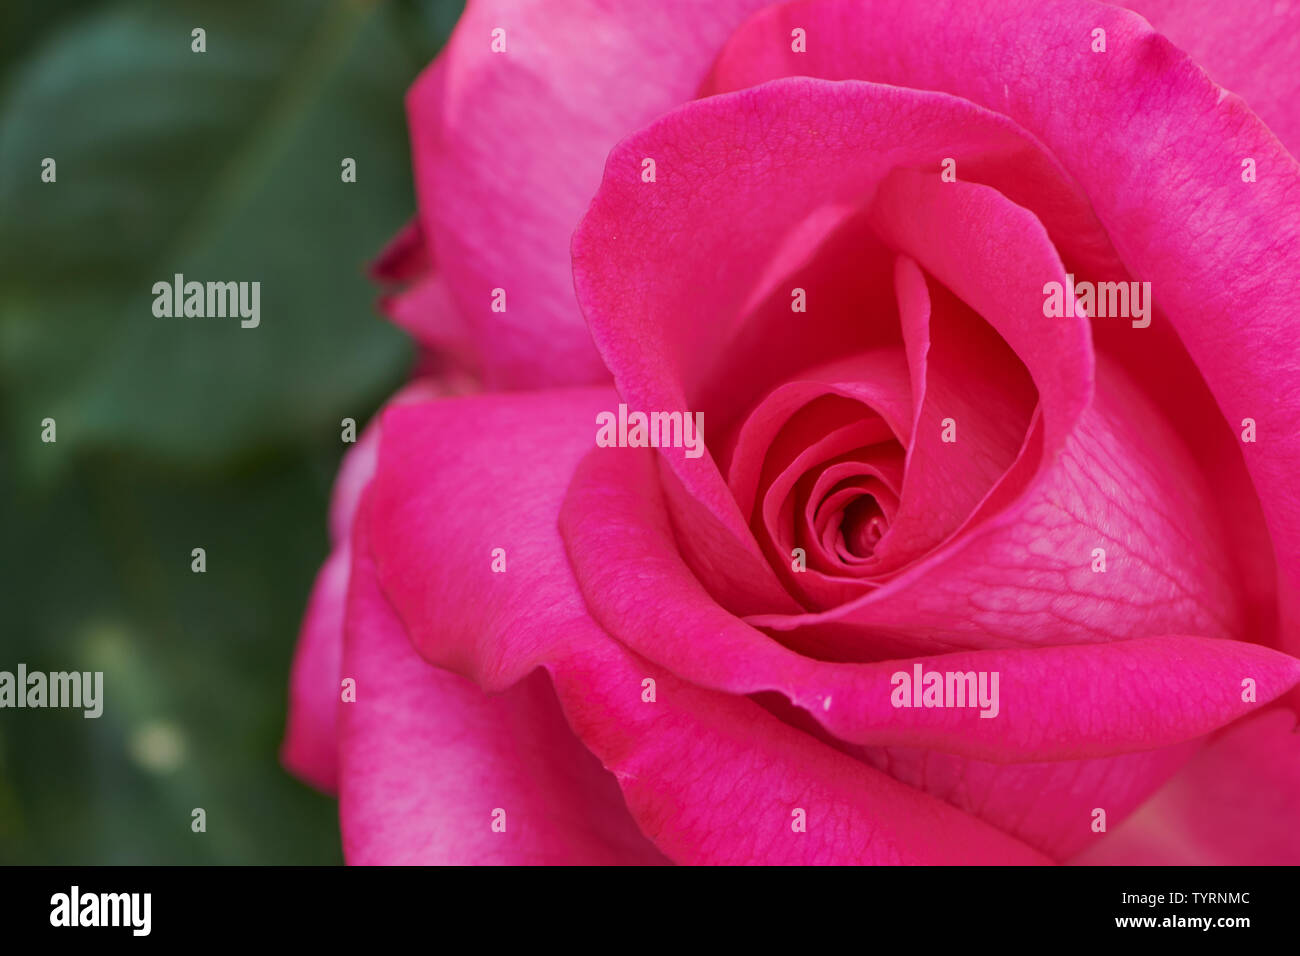 macro of a pink rose with the name: Parole Stock Photo